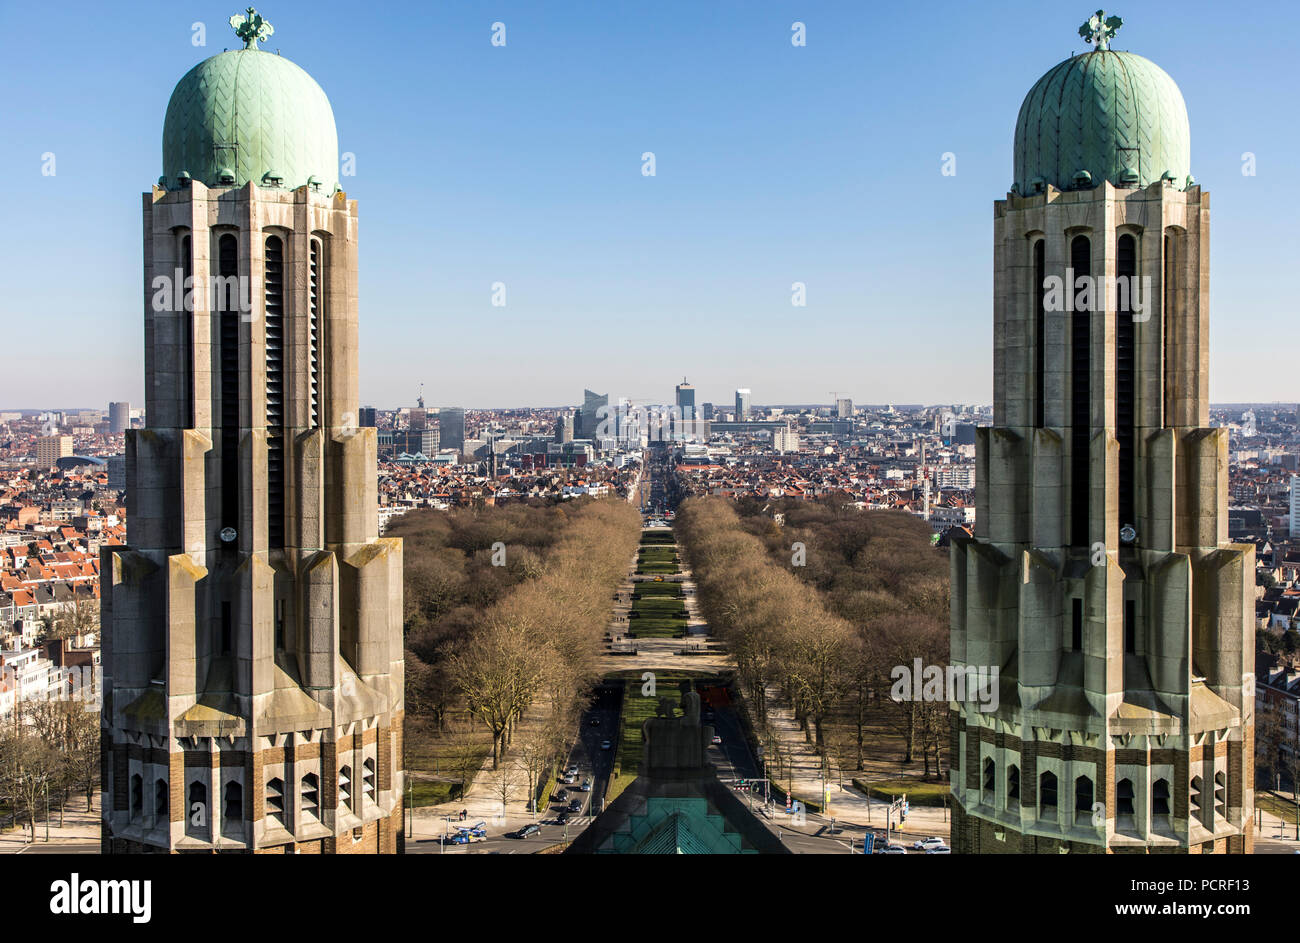 Church of the National Basilica of the Sacred Heart, Basilique Nationale du SacrŽ-CÏur, Basilica of Koekelberg, Brussels, view from the viewing platfo Stock Photo